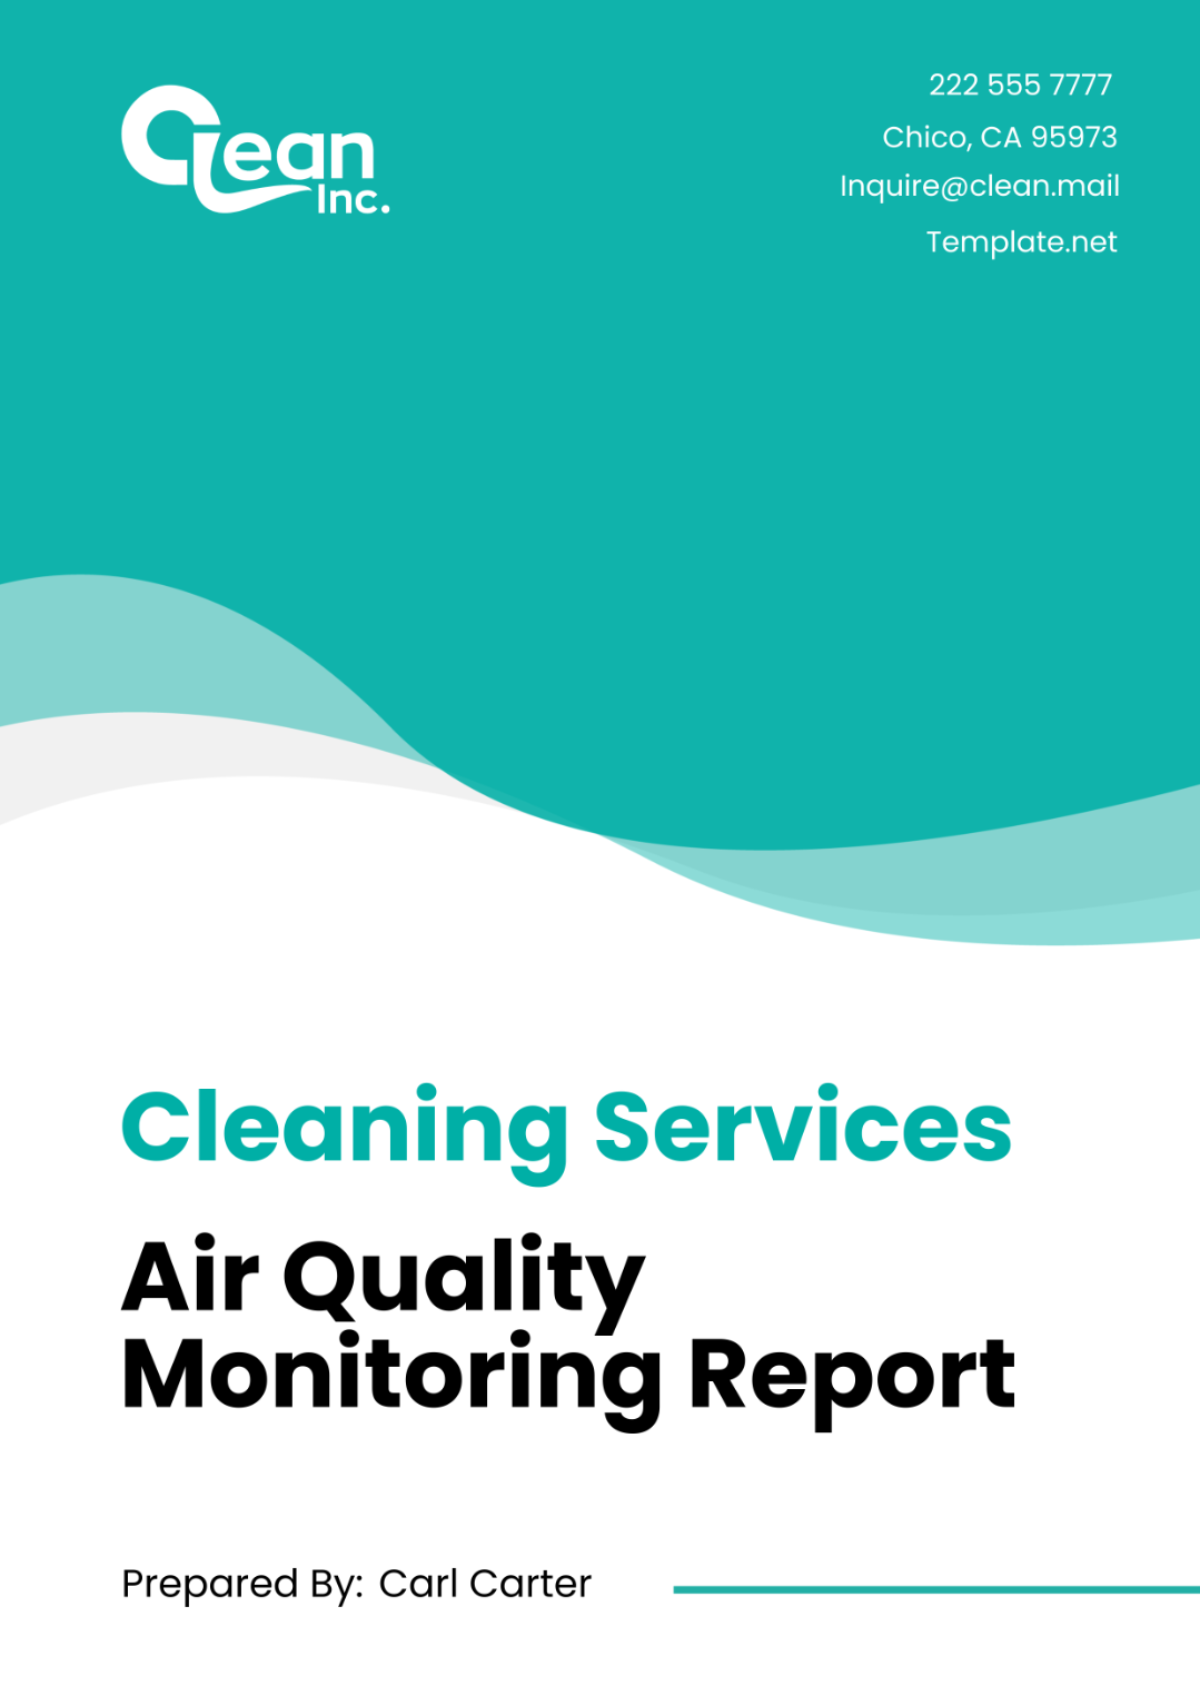 Cleaning Services Air Quality Monitoring Report Template